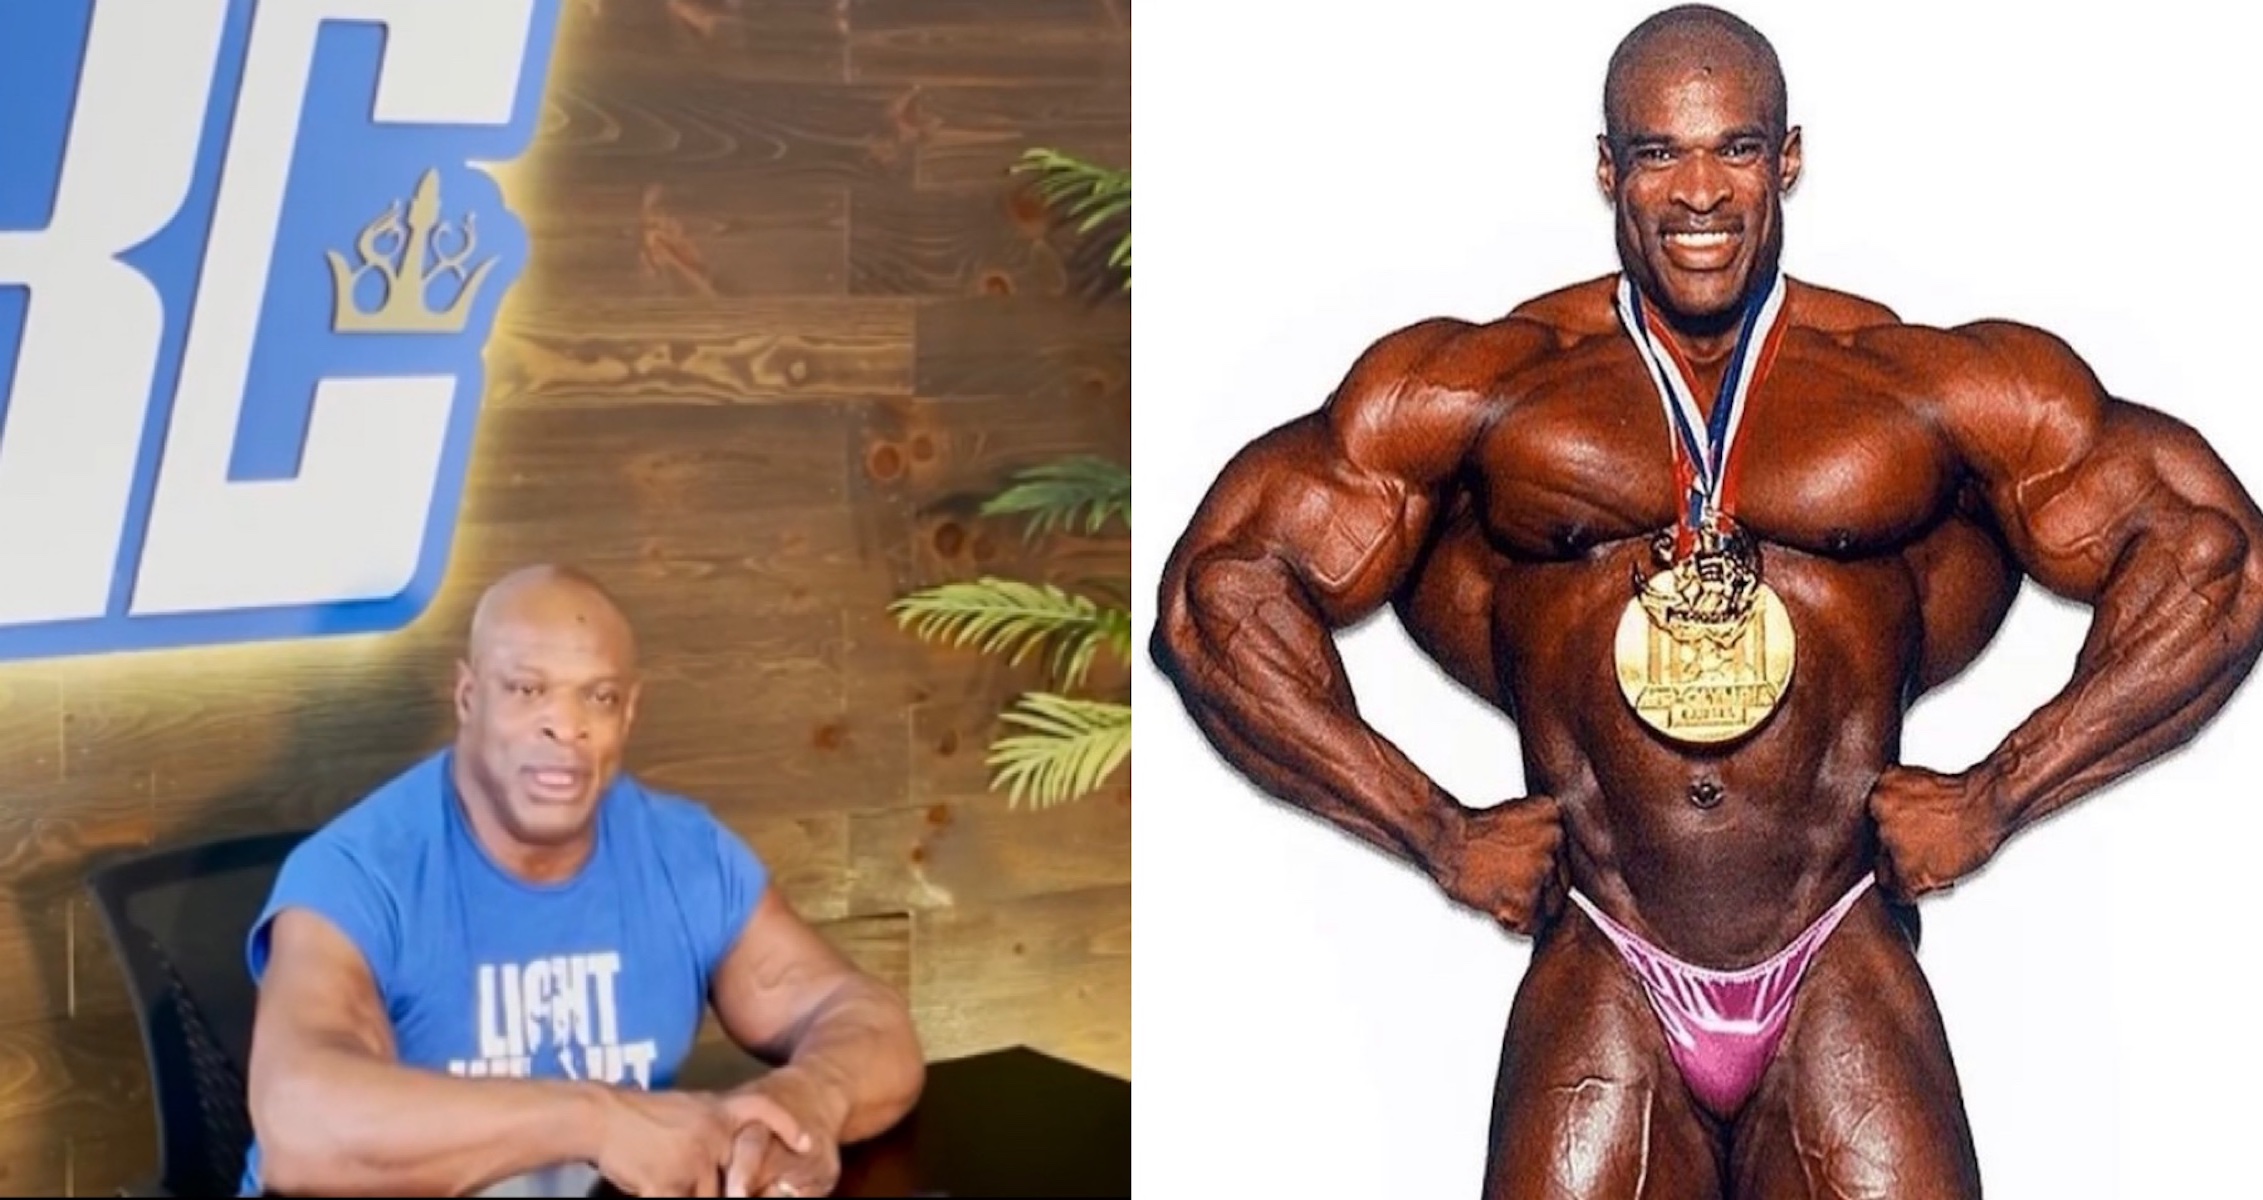 Ronnie Coleman Discusses Motivation In The Gym At 57 Years Old